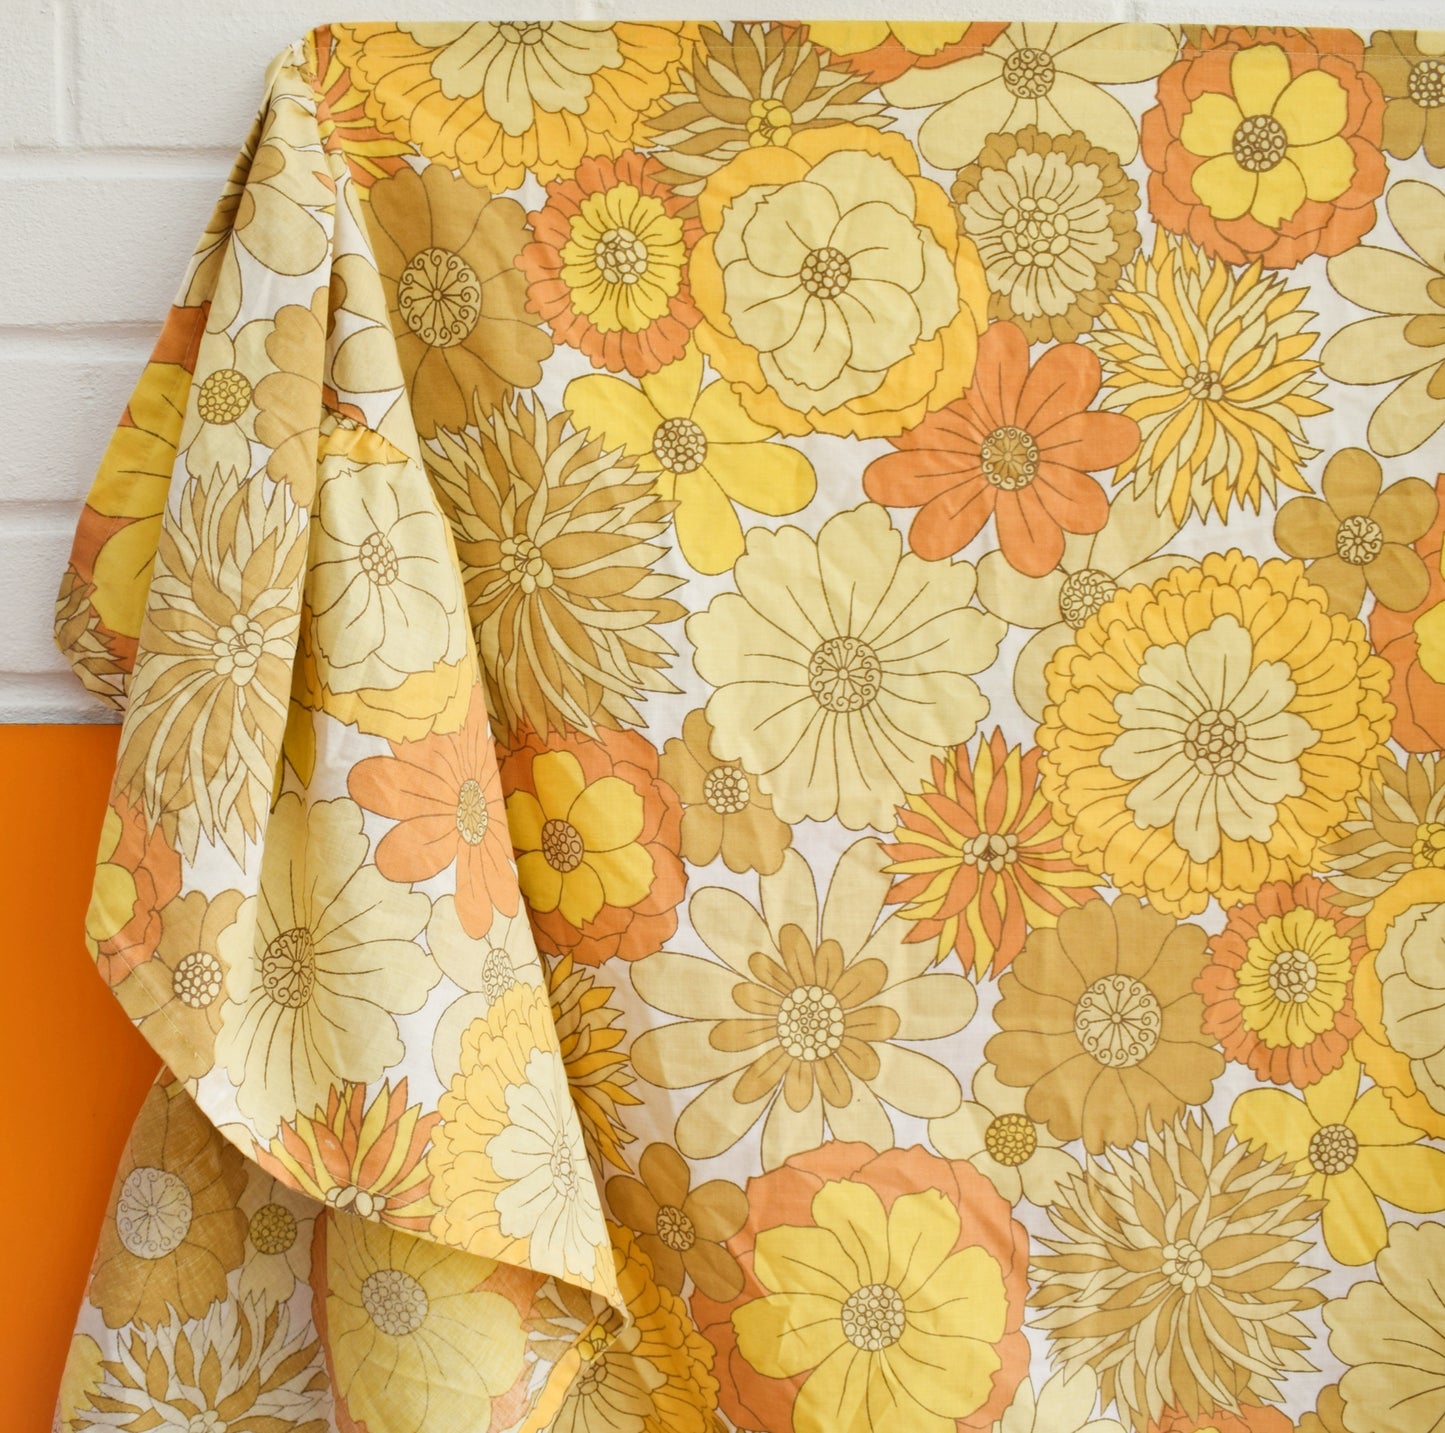 Vintage 1960s Bed Valance - Flower Power - M&S -Yellow